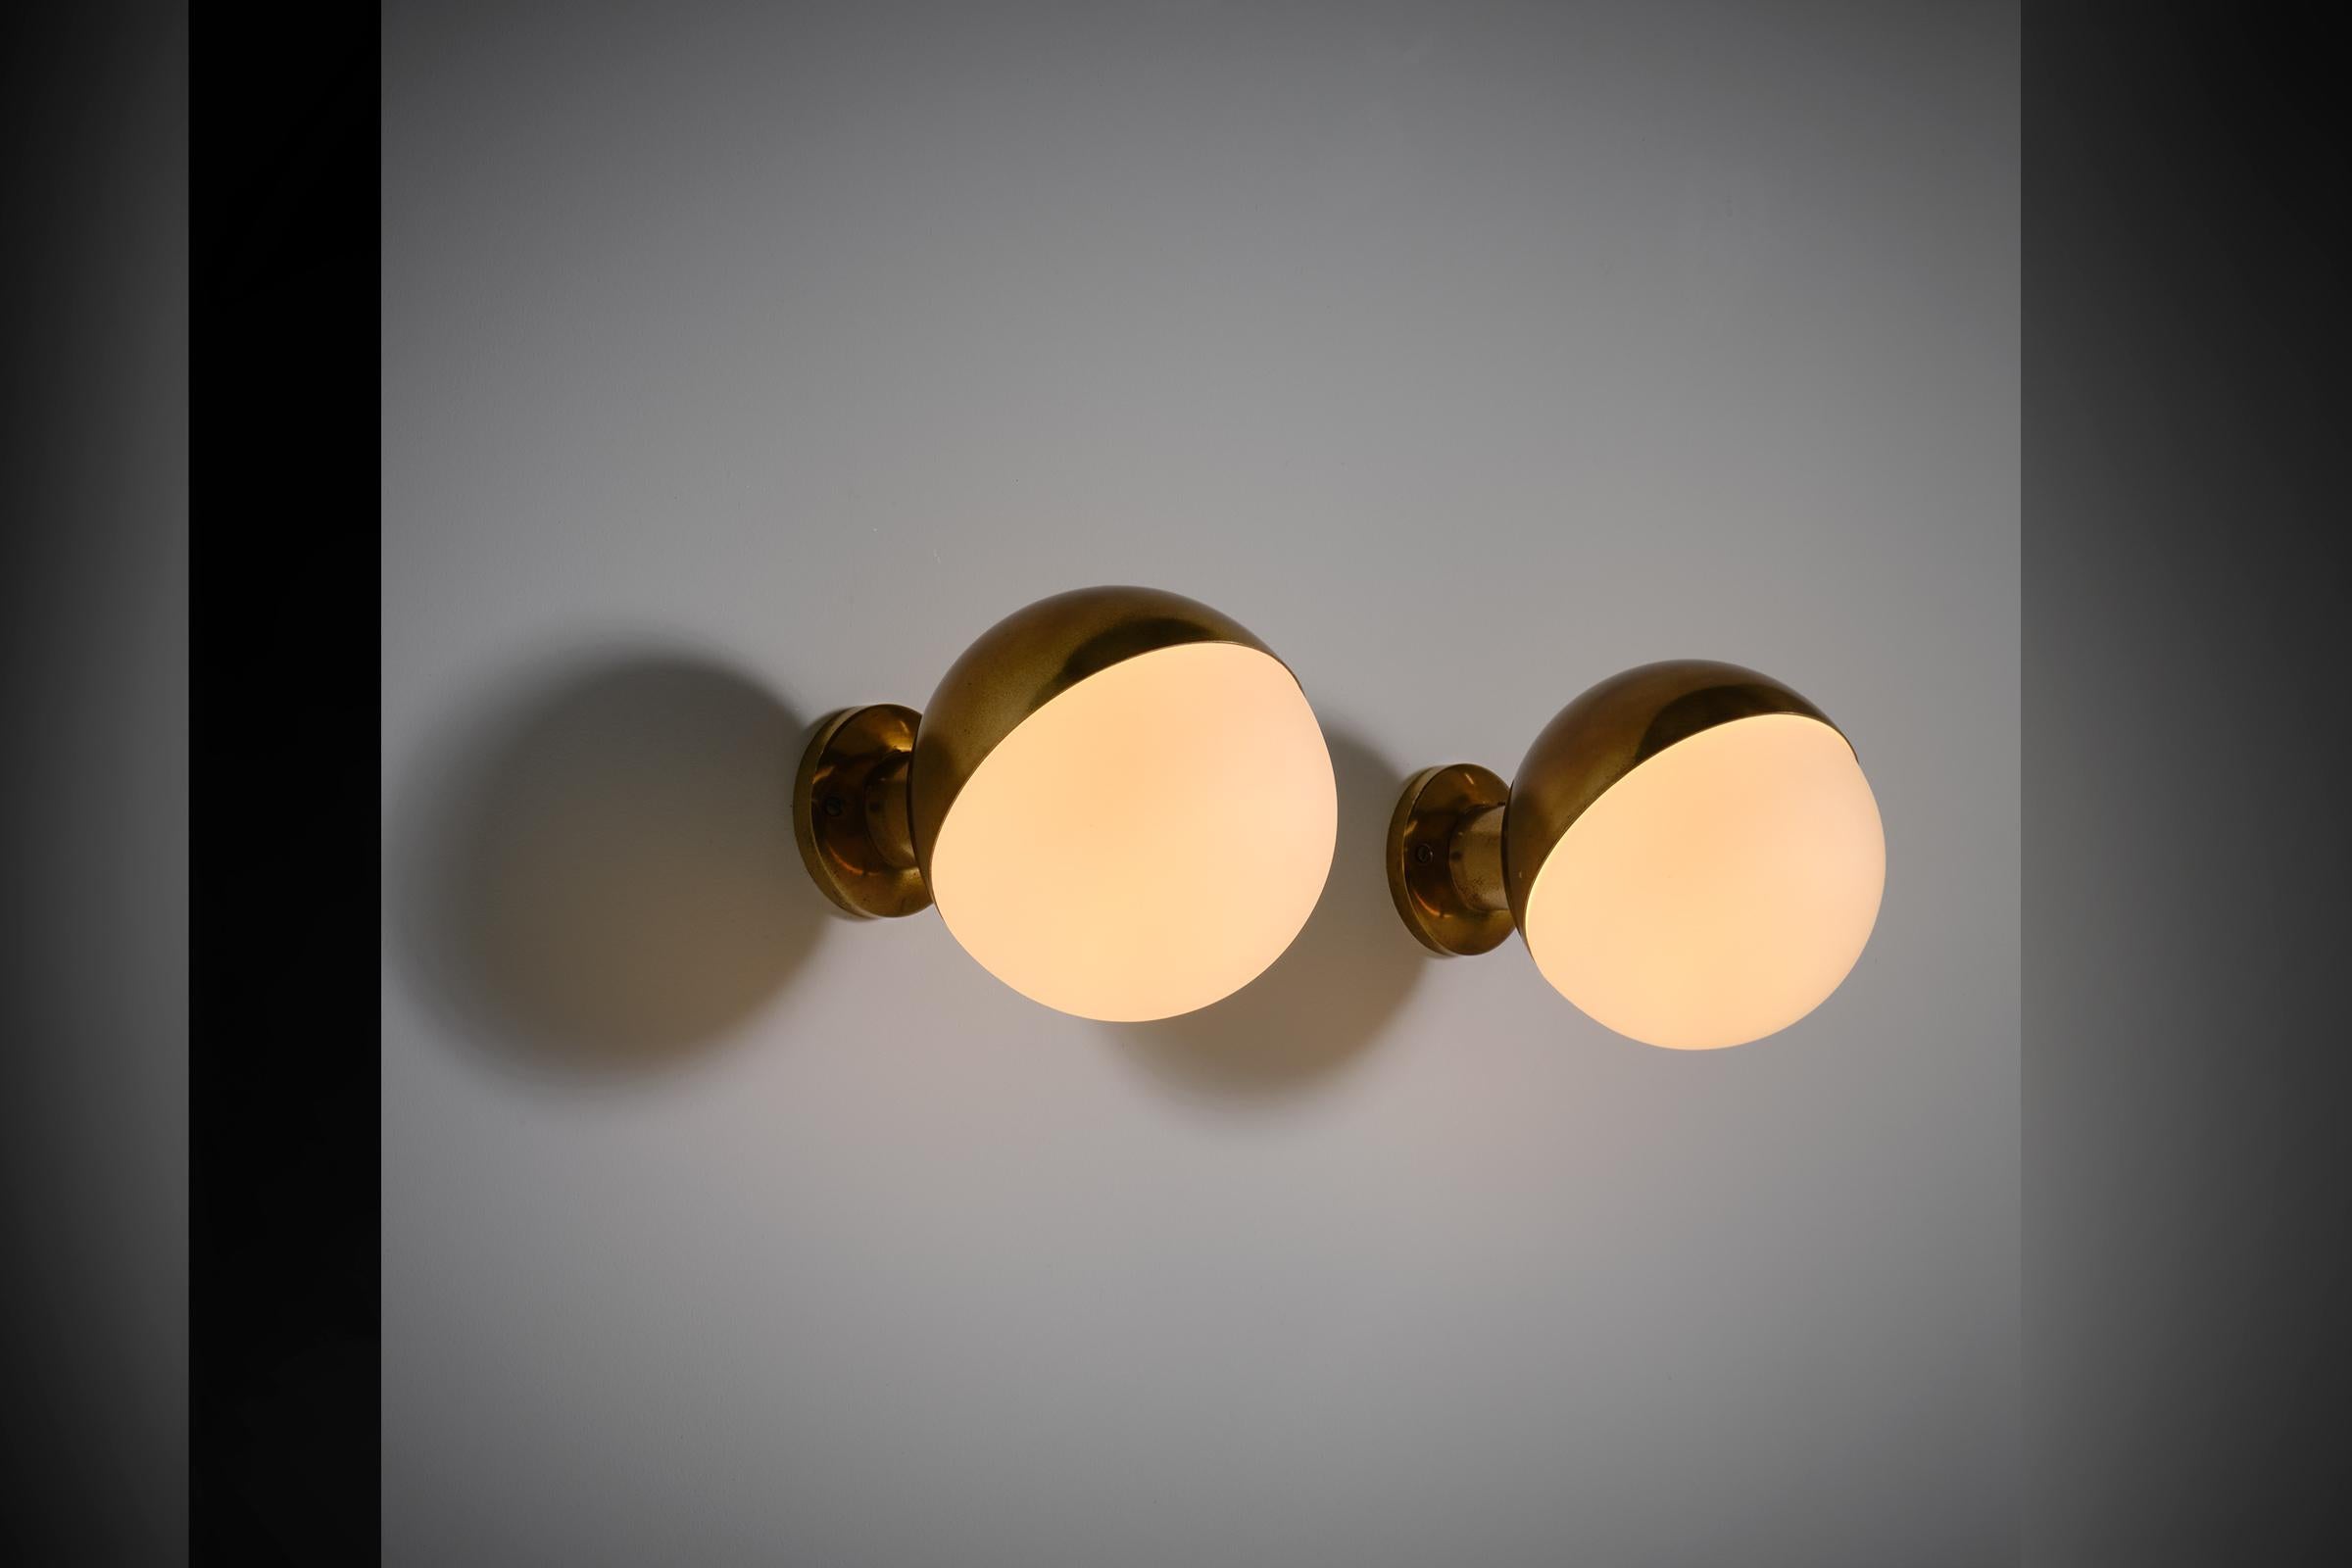 Stilnovo ‘Model 2045’ wall lamps, Italy 1950s. Beautiful design constructed out of a solid brass ball shaped fixture and matte opaline glass. The lamps produce a very nice warm and soft light due to the matte diffuser. Marked with the original